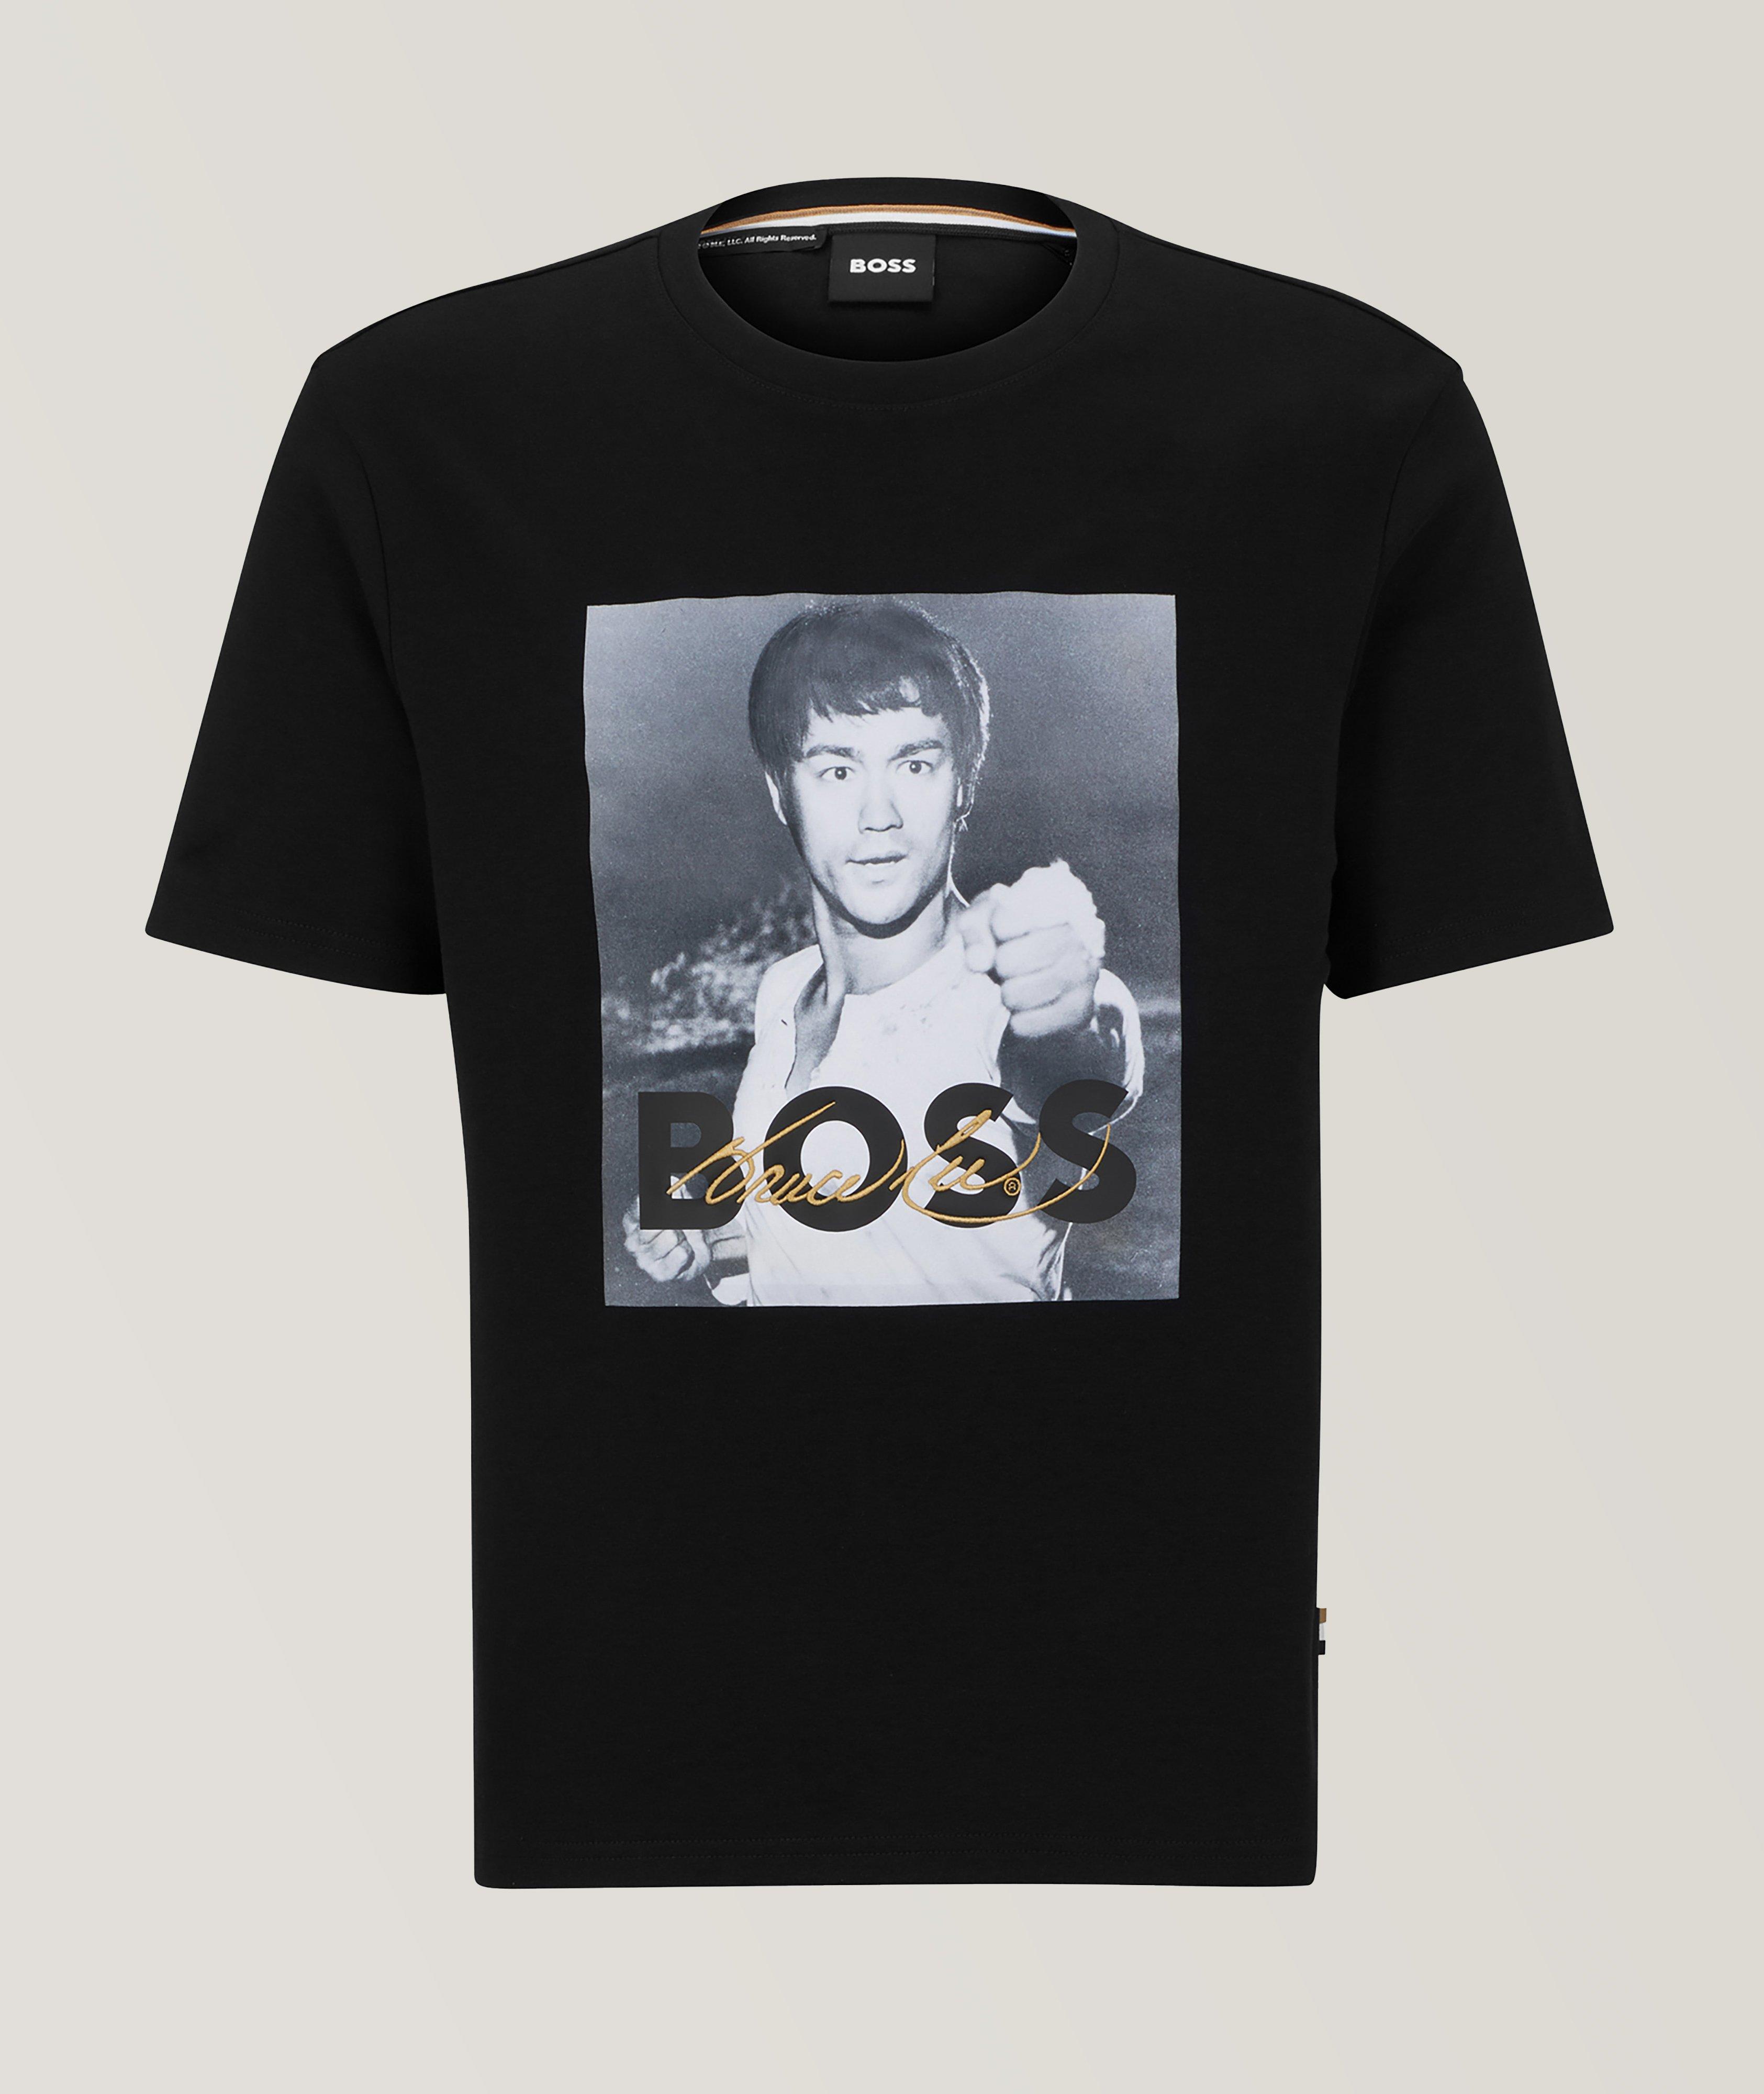 Boss Legends Bruce Lee Collection Printed T-Shirt image 0